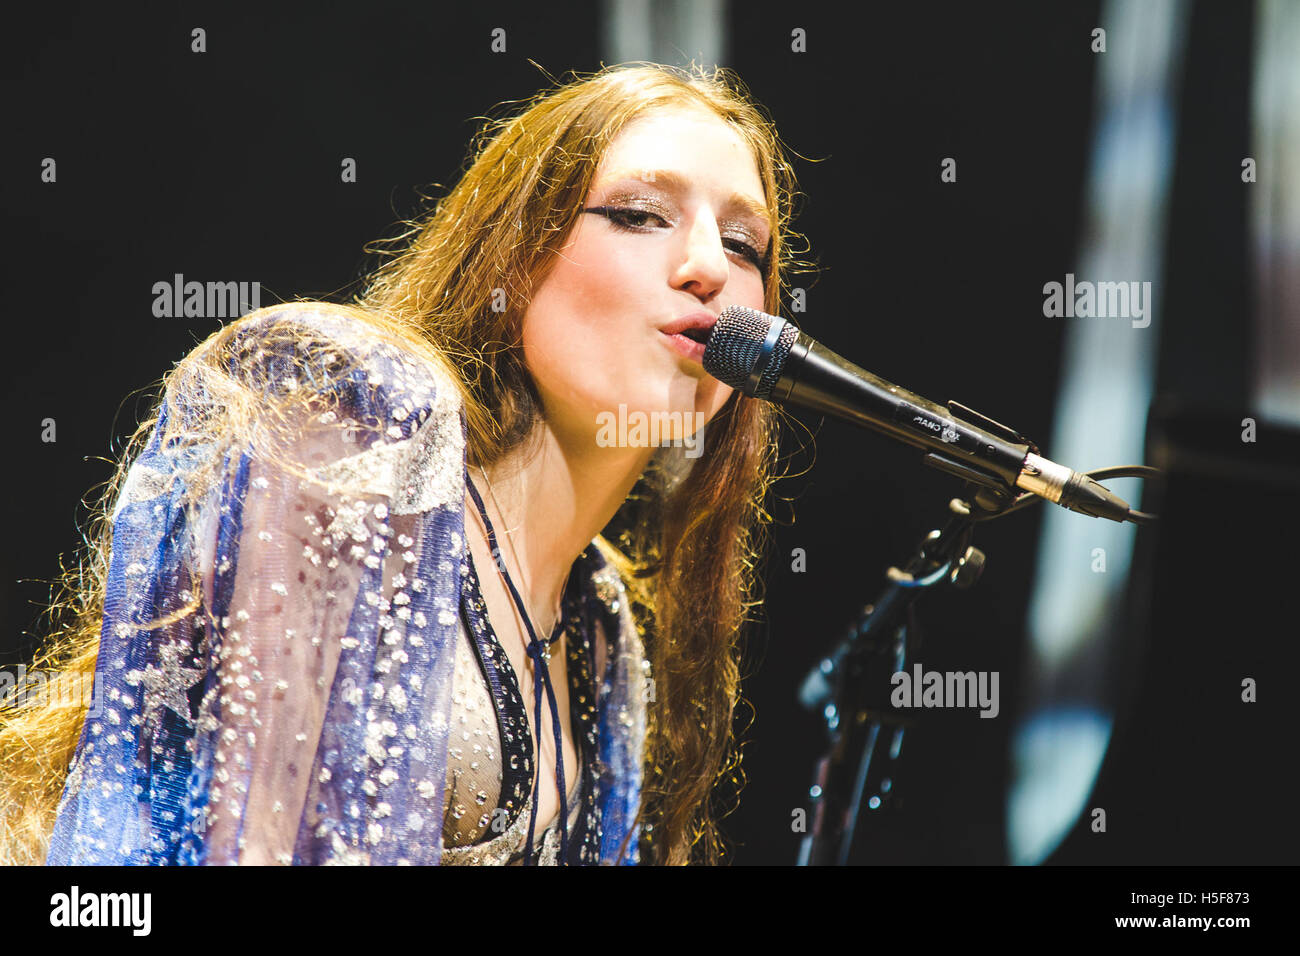 London, UK. 20th October, 2016. October 20, 2016 - English musician/singer/songwriter, Jasmine Lucilla Elizabeth Jennifer van den Bogaerde, better known by her stage name Birdy, performs at the Hammersmith Apollo, London, 2016 Credit:  Myles Wright/ZUMA Wire/Alamy Live News Stock Photo